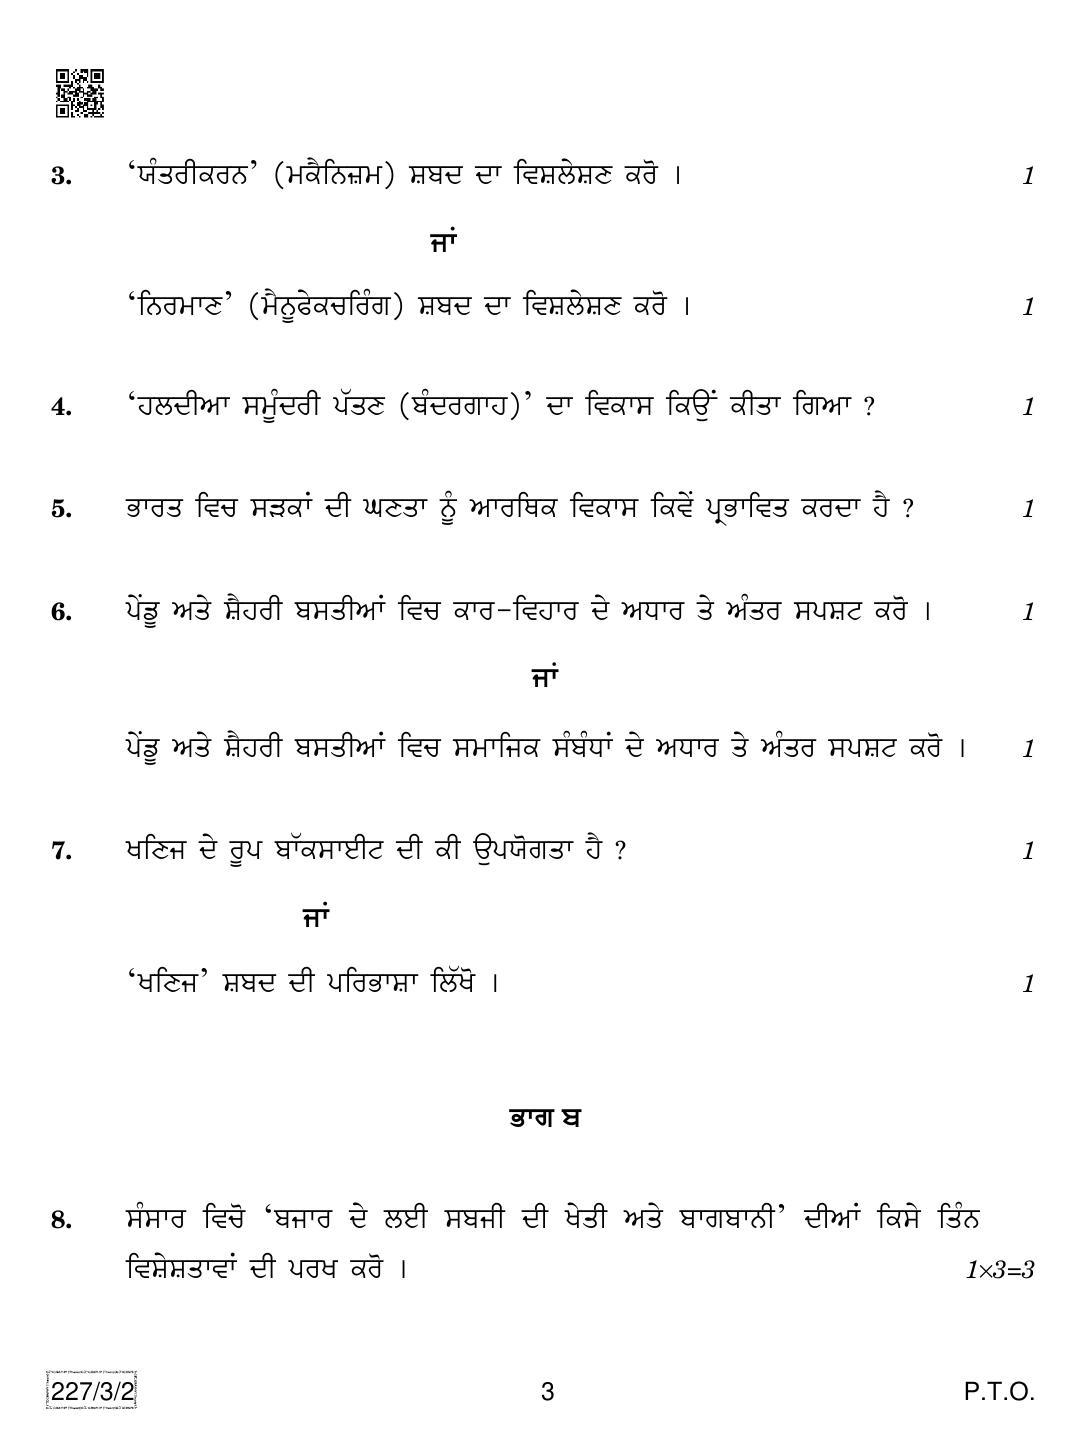 CBSE Class 12 227-3-2 Geography (Punjabi) 2019 Question Paper - Page 3